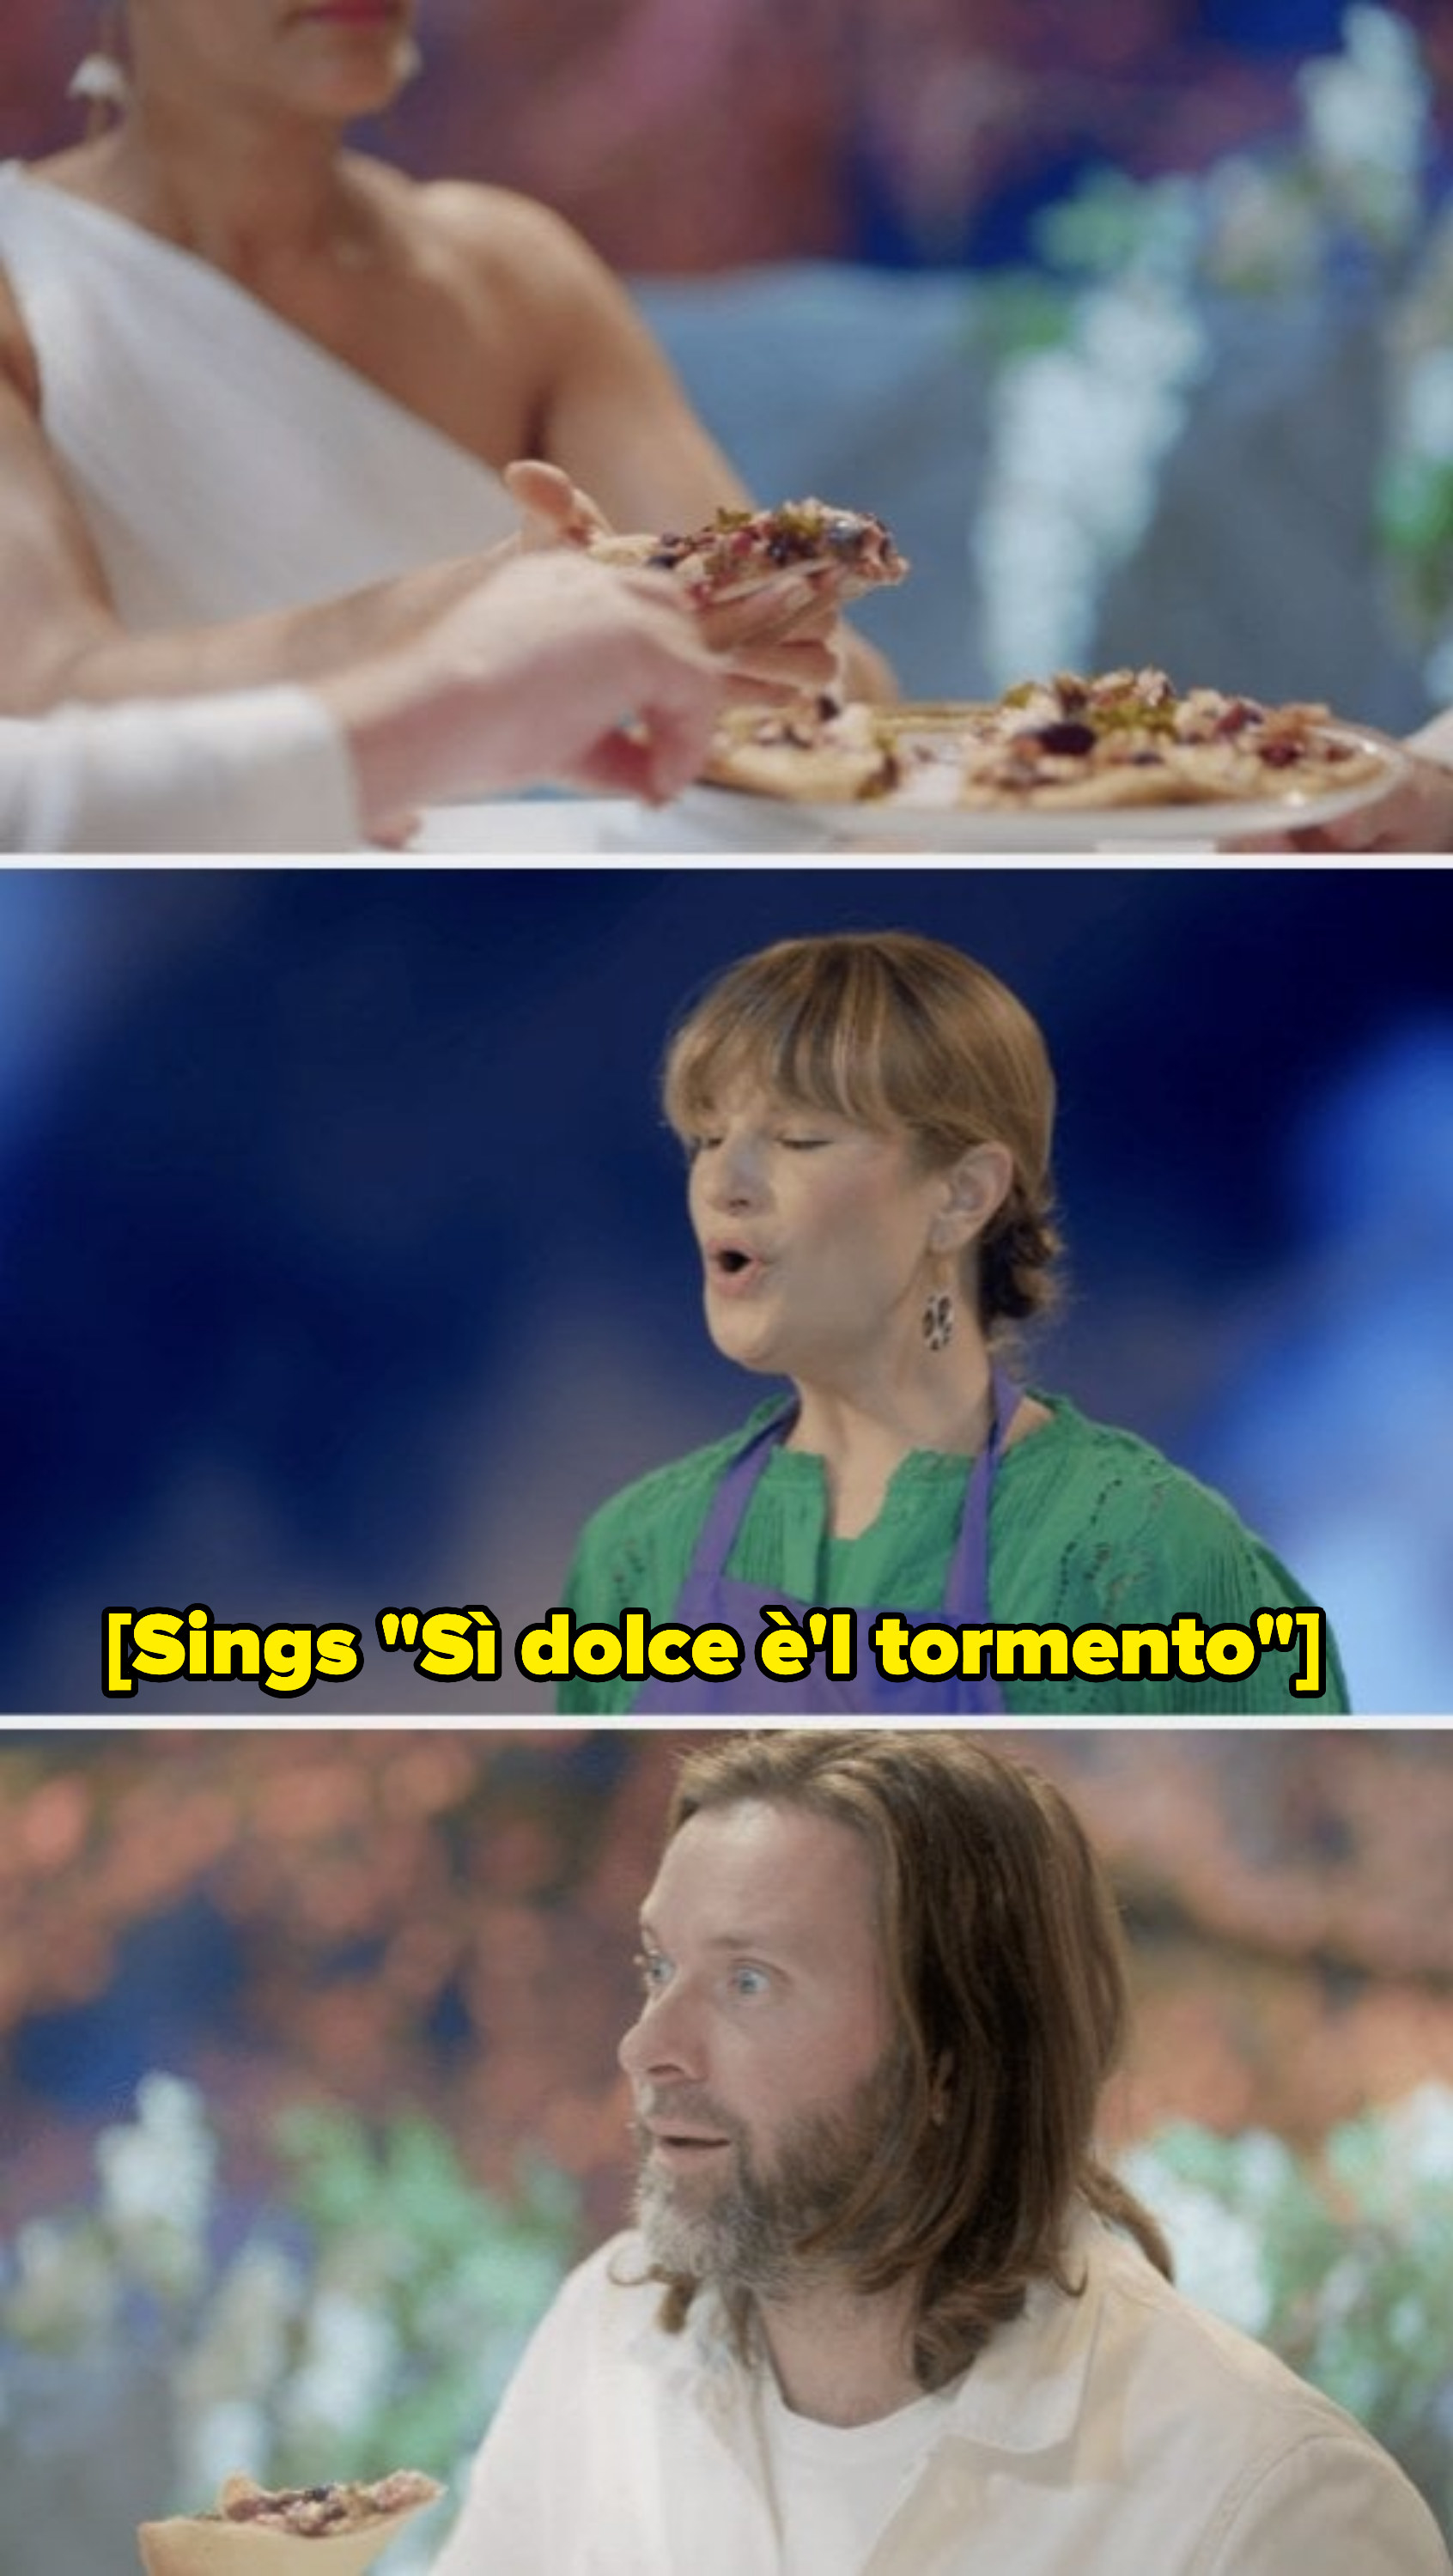 A woman sings operatically as judges eat a pizza